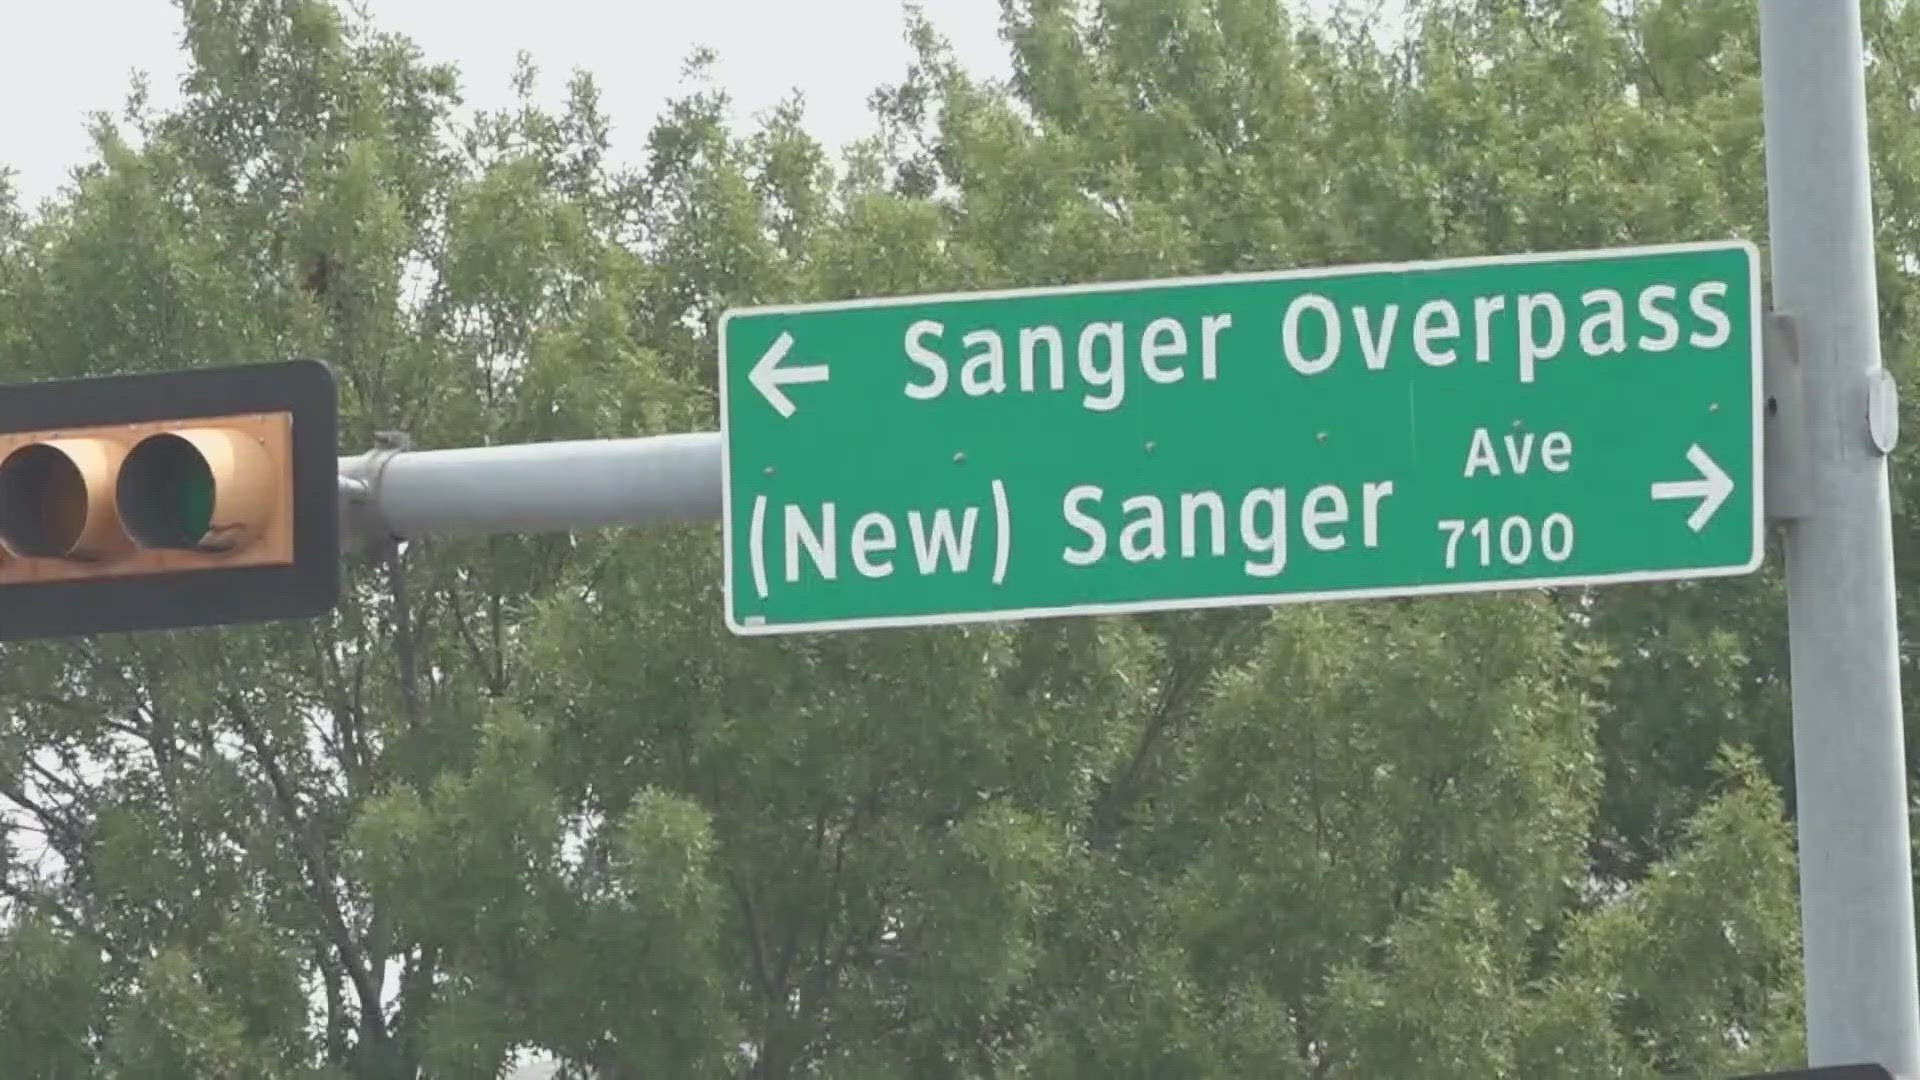 After 6News reached out to TXDOT about a big bump on Sanger Overpass, they said they’ll repair it.